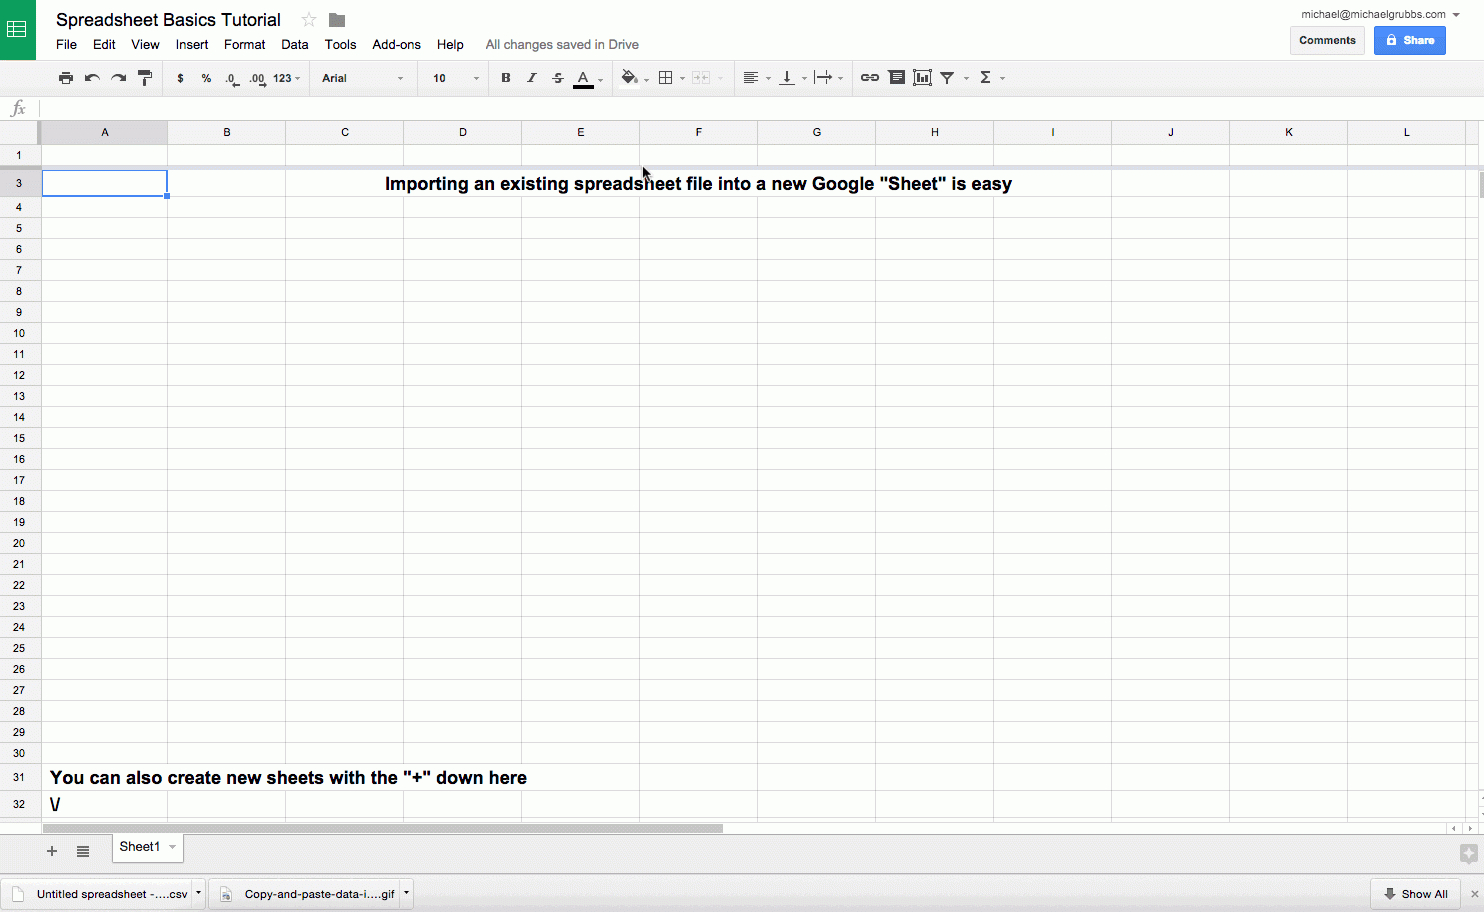 How Do I Create A Spreadsheet On Google Docs With Google Sheets 101: The Beginner's Guide To Online Spreadsheets  The